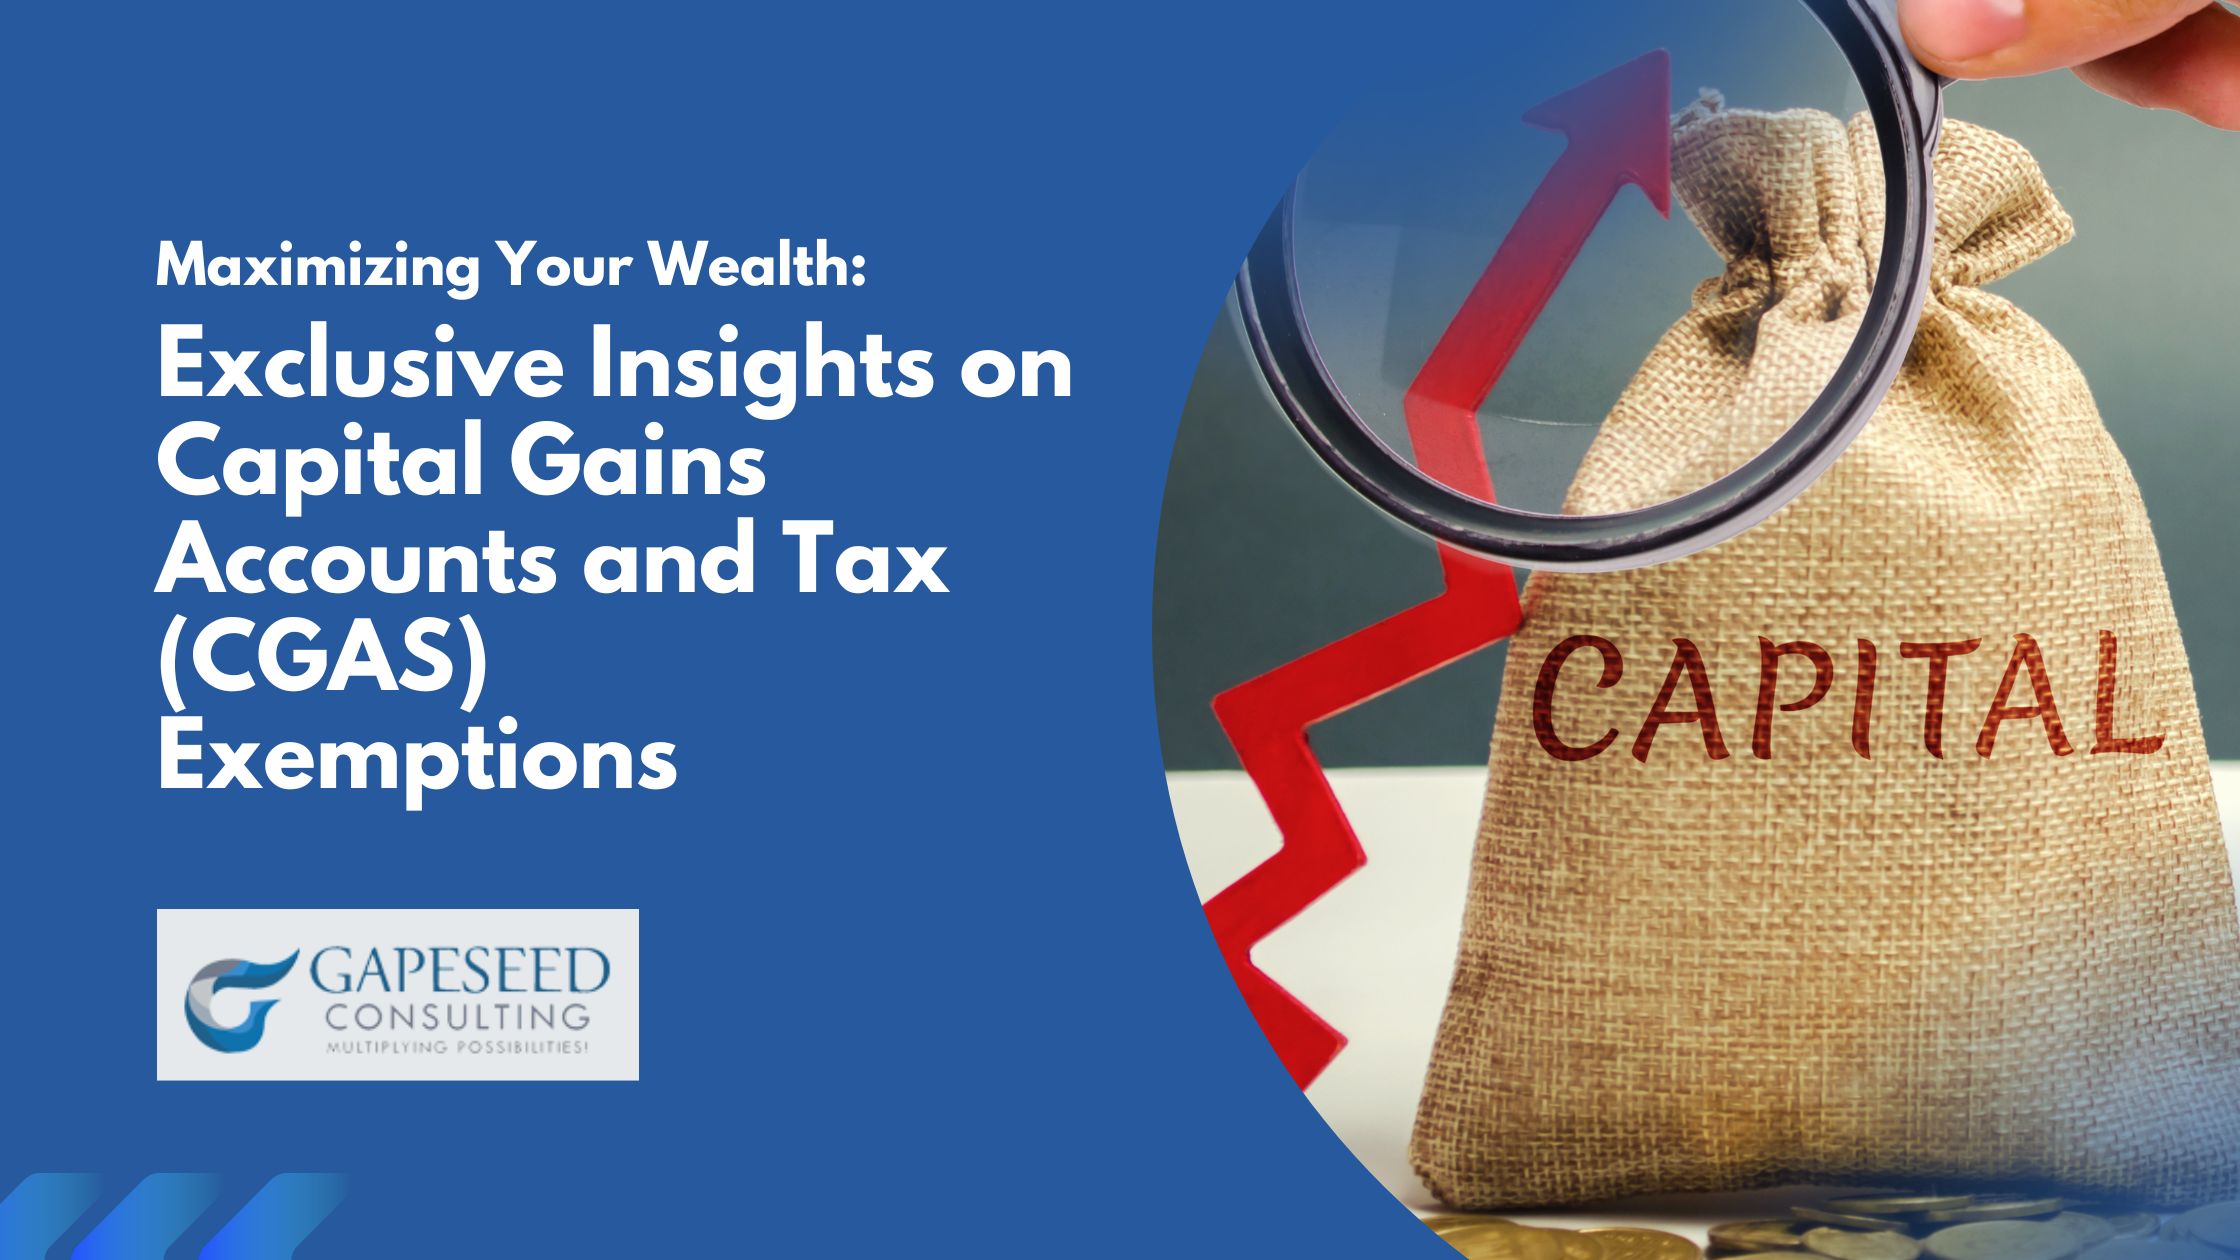 Maximizing Your Wealth: Exclusive Insights on Capital Gains Accounts and Tax Exemptions